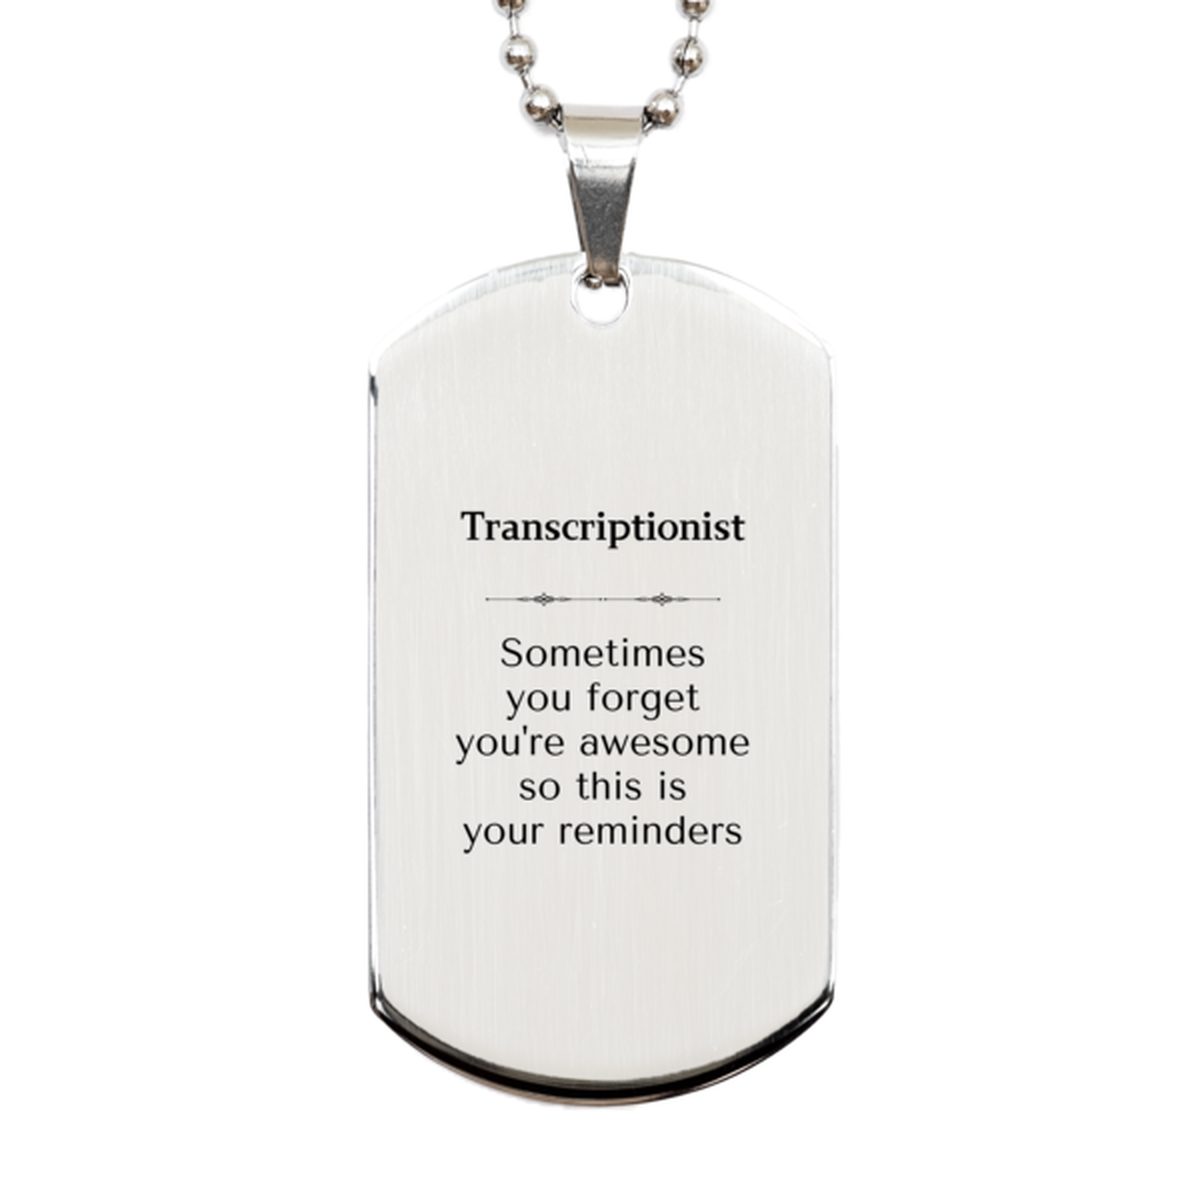 Sentimental Transcriptionist Silver Dog Tag, Transcriptionist Sometimes you forget you're awesome so this is your reminders, Graduation Christmas Birthday Gifts for Transcriptionist, Men, Women, Coworkers